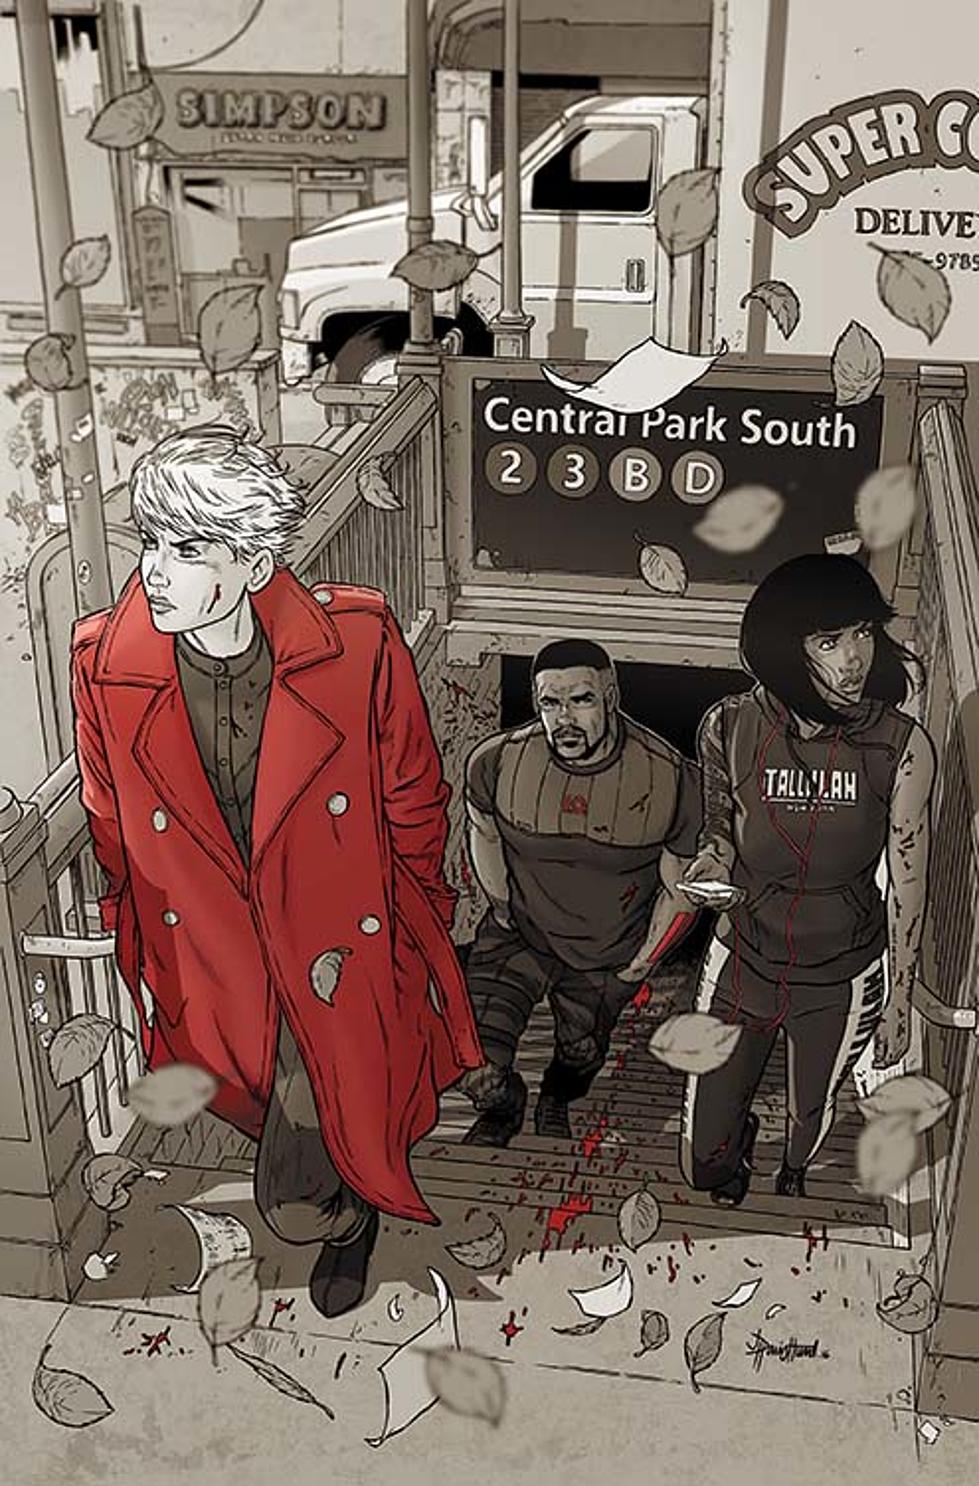 Birds of Prey #2: Playing the Wild Card Early - Comic Watch